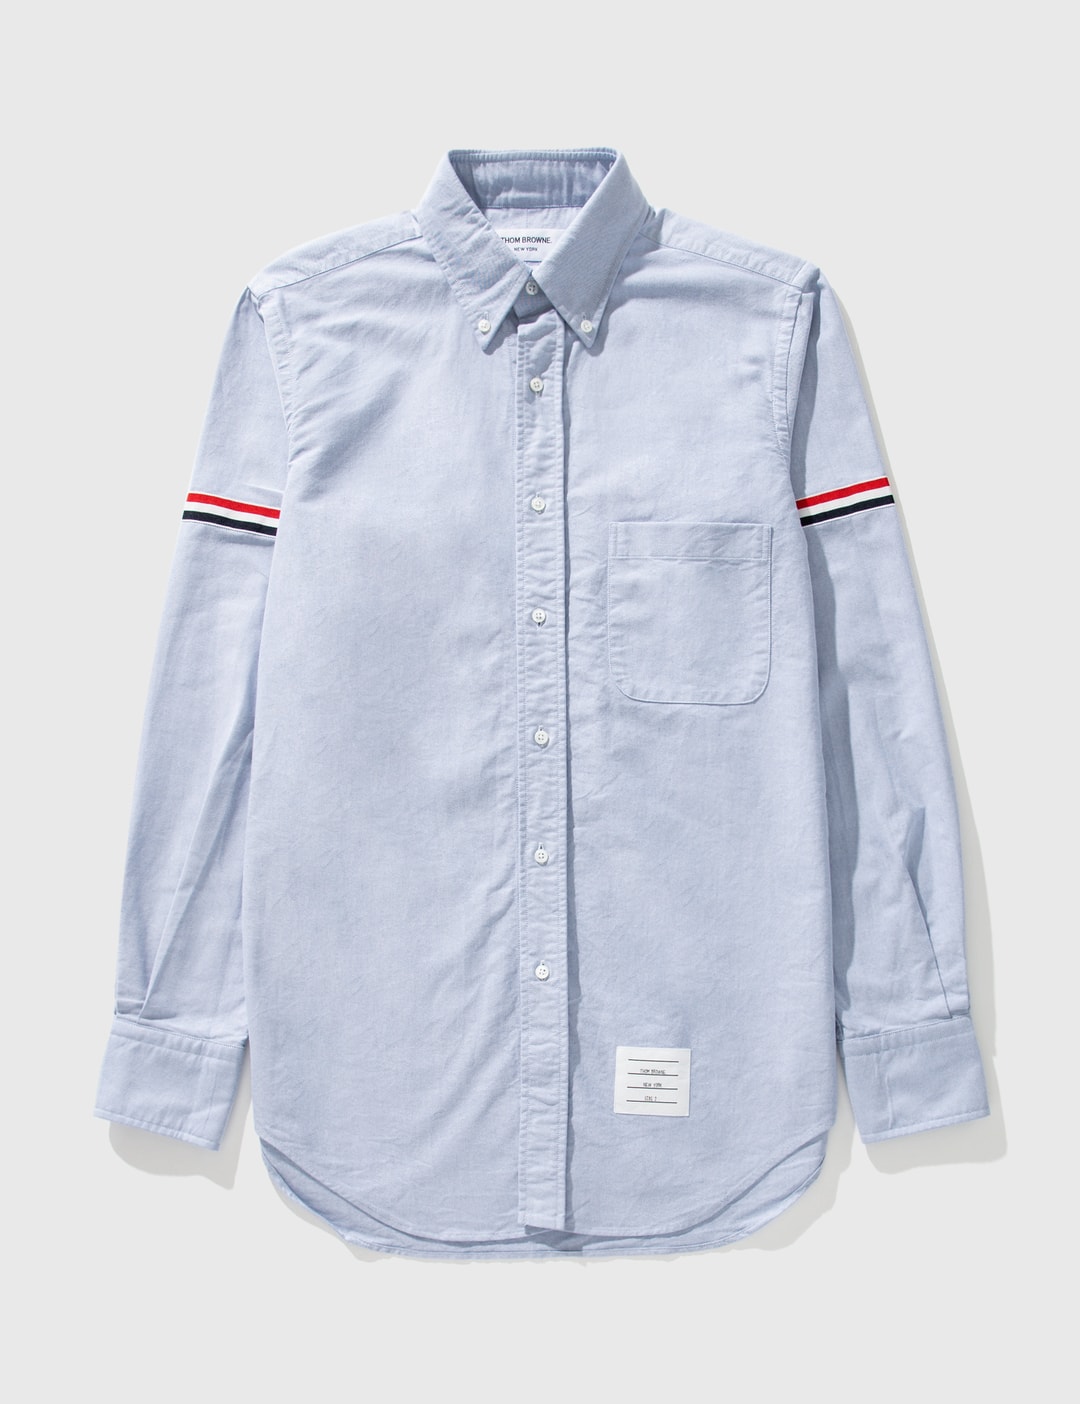 Thom Browne - Oxford Shirt with Grosgrain Armband | HBX - Globally ...